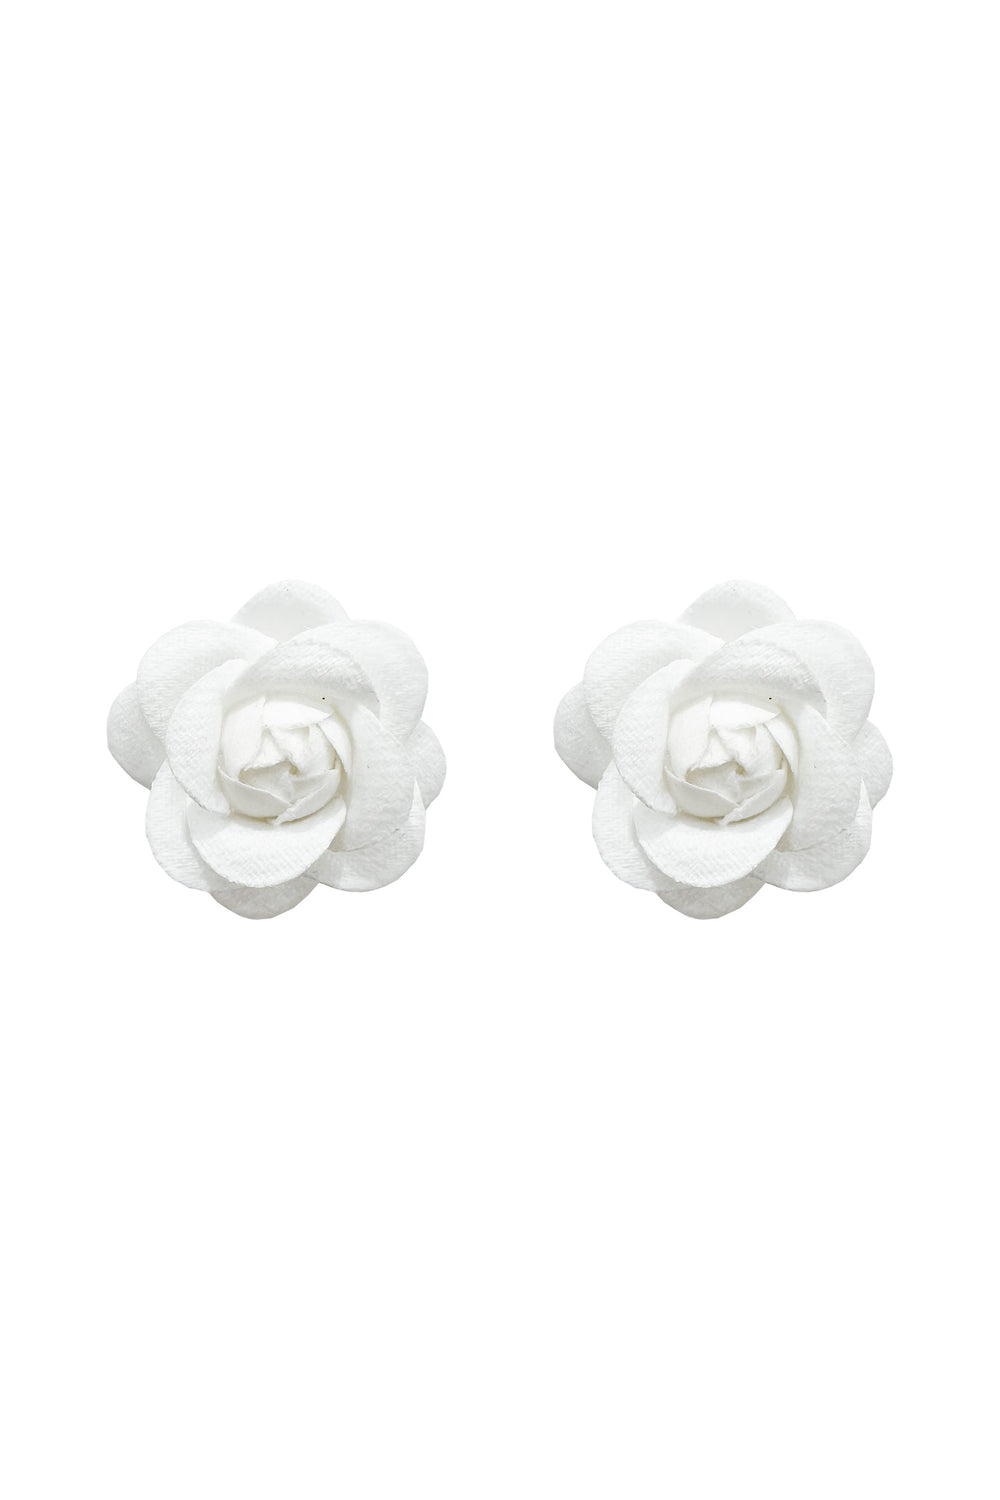 White fabric rose flower studs - charming earrings crafted from delicate fabric, showcasing an elegant rose design for a timeless and feminine accessory.